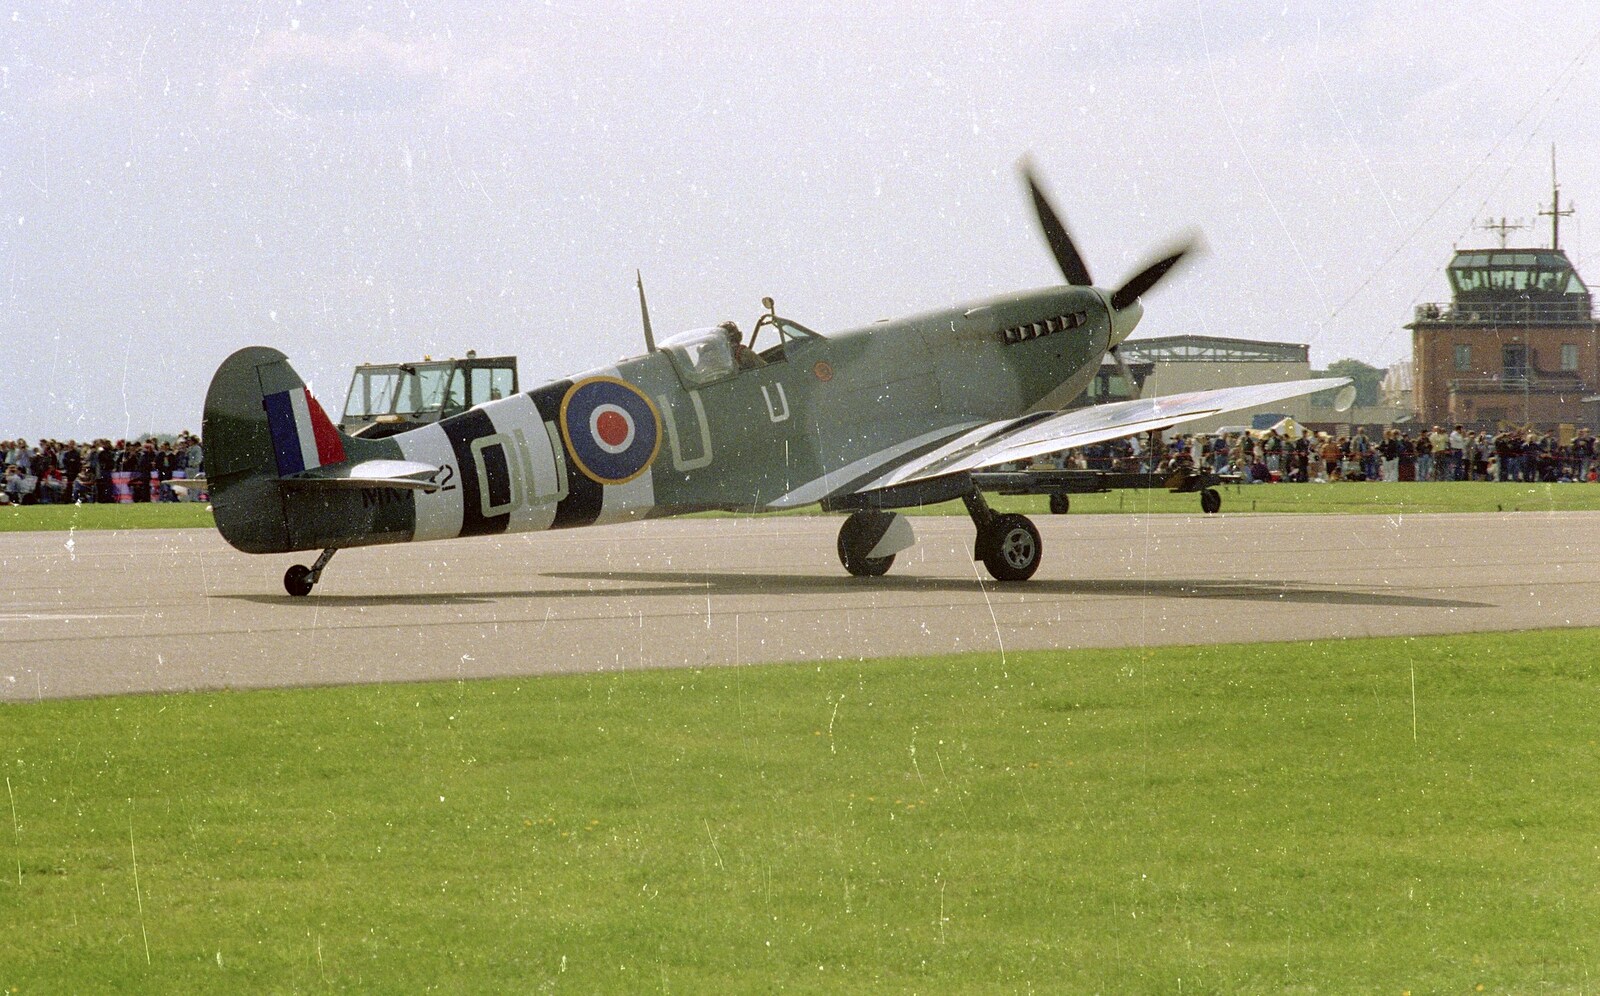 Mark 9 Spitfire 'Baby Bea V' (OU-U) from The Mildenhall Air Fete, Mildenhall, Suffolk - 29th May 1994